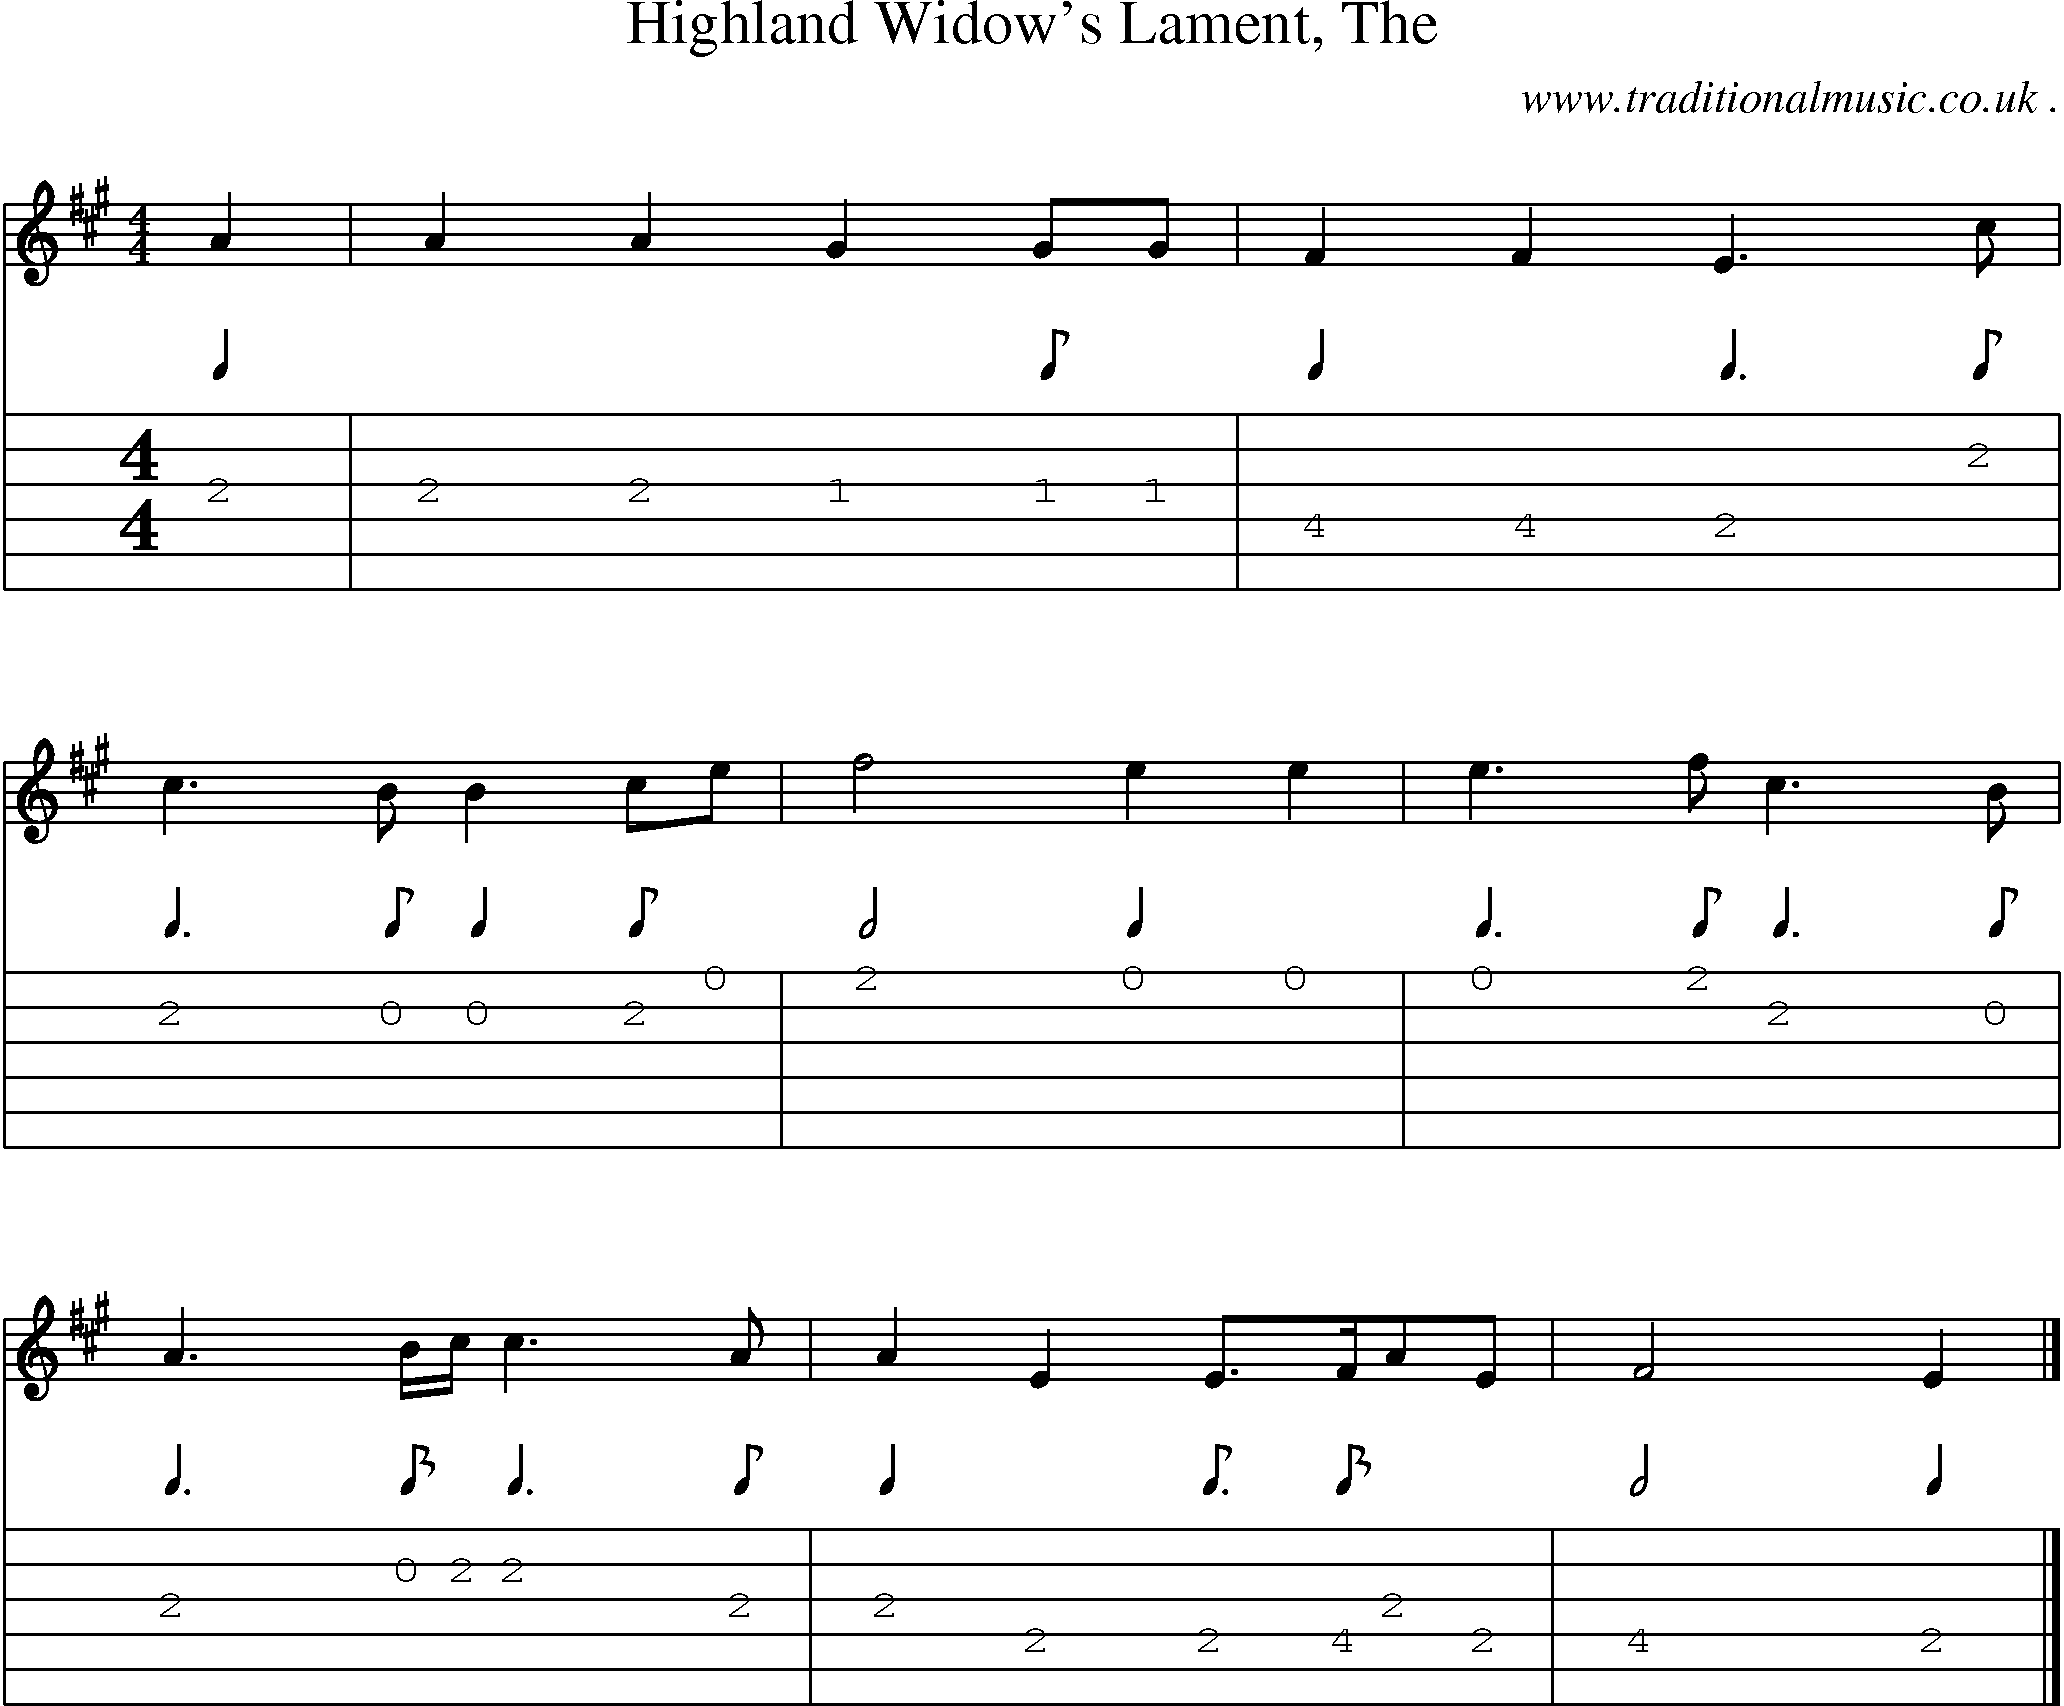 Sheet-music  score, Chords and Guitar Tabs for Highland Widows Lament The